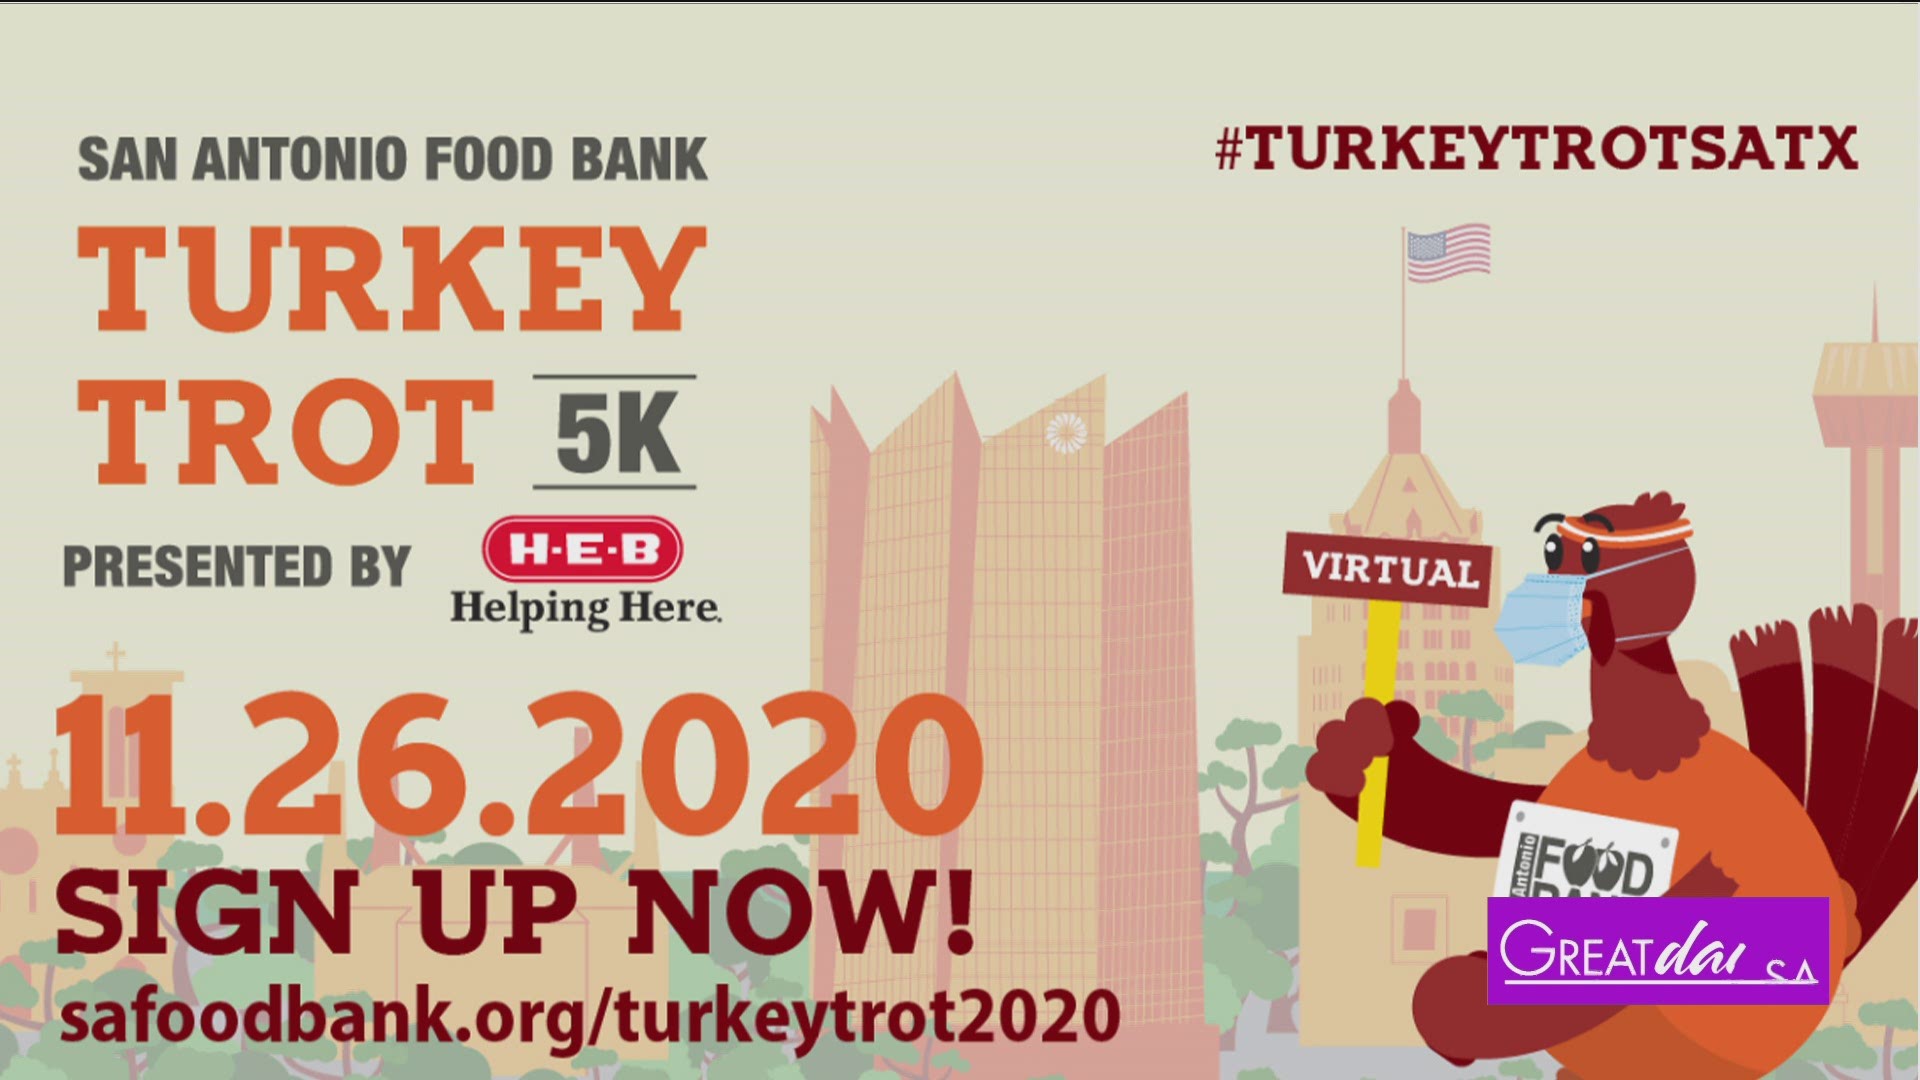 AAFCU has been a long-time sponsor of the Turkey Trot and this year they're encouraging you to participate virtually.